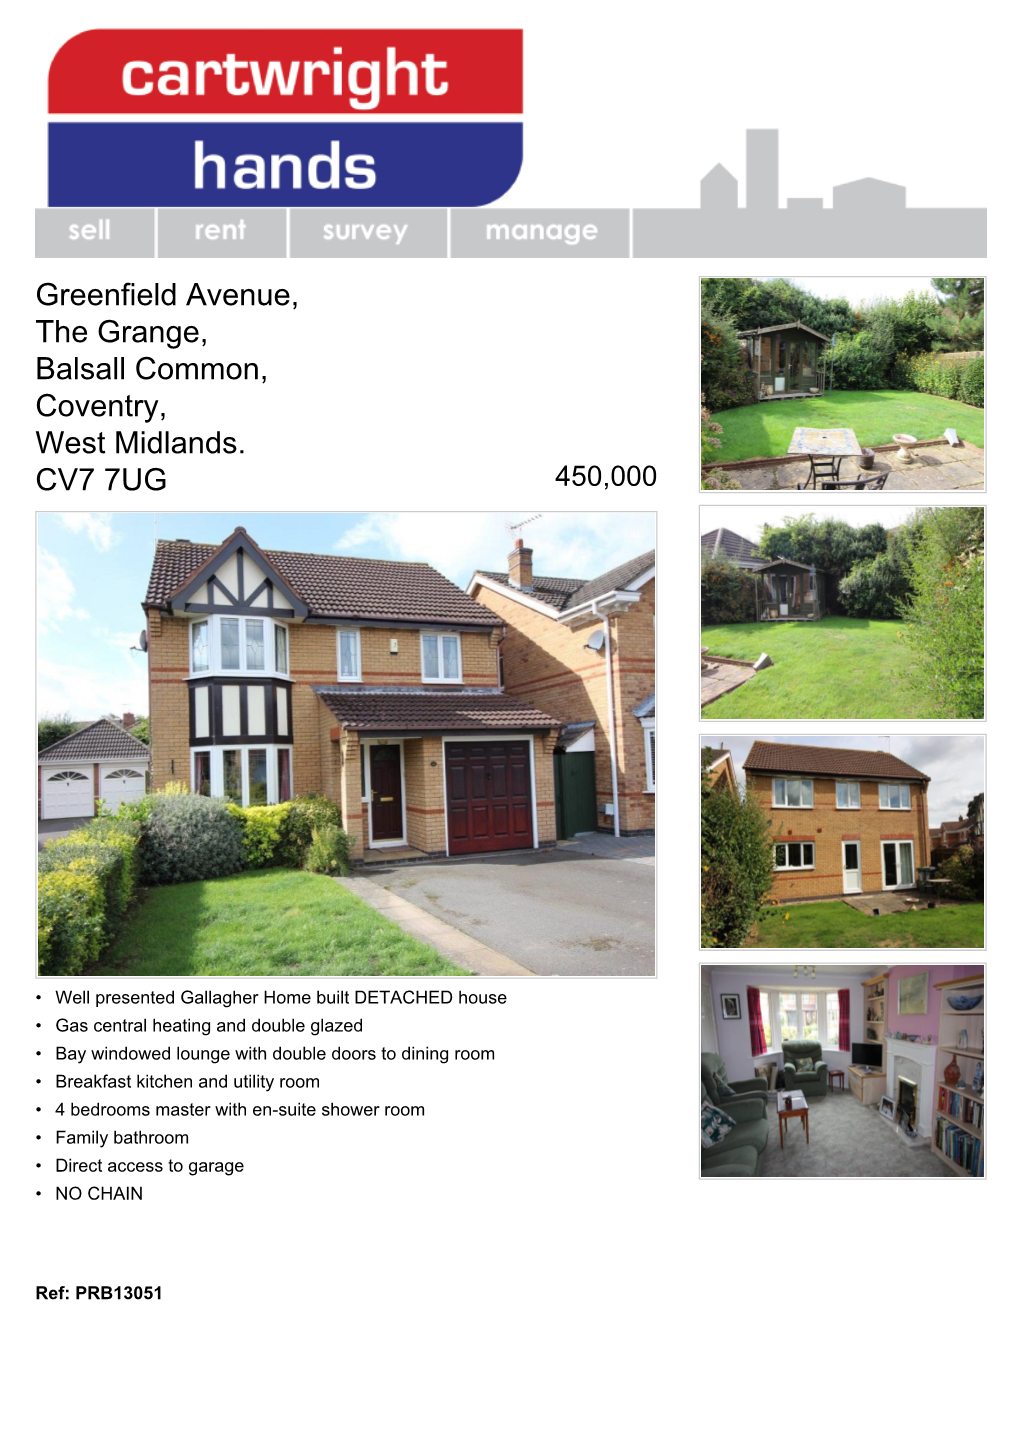 Greenfield Avenue, the Grange, Balsall Common, Coventry, West Midlands